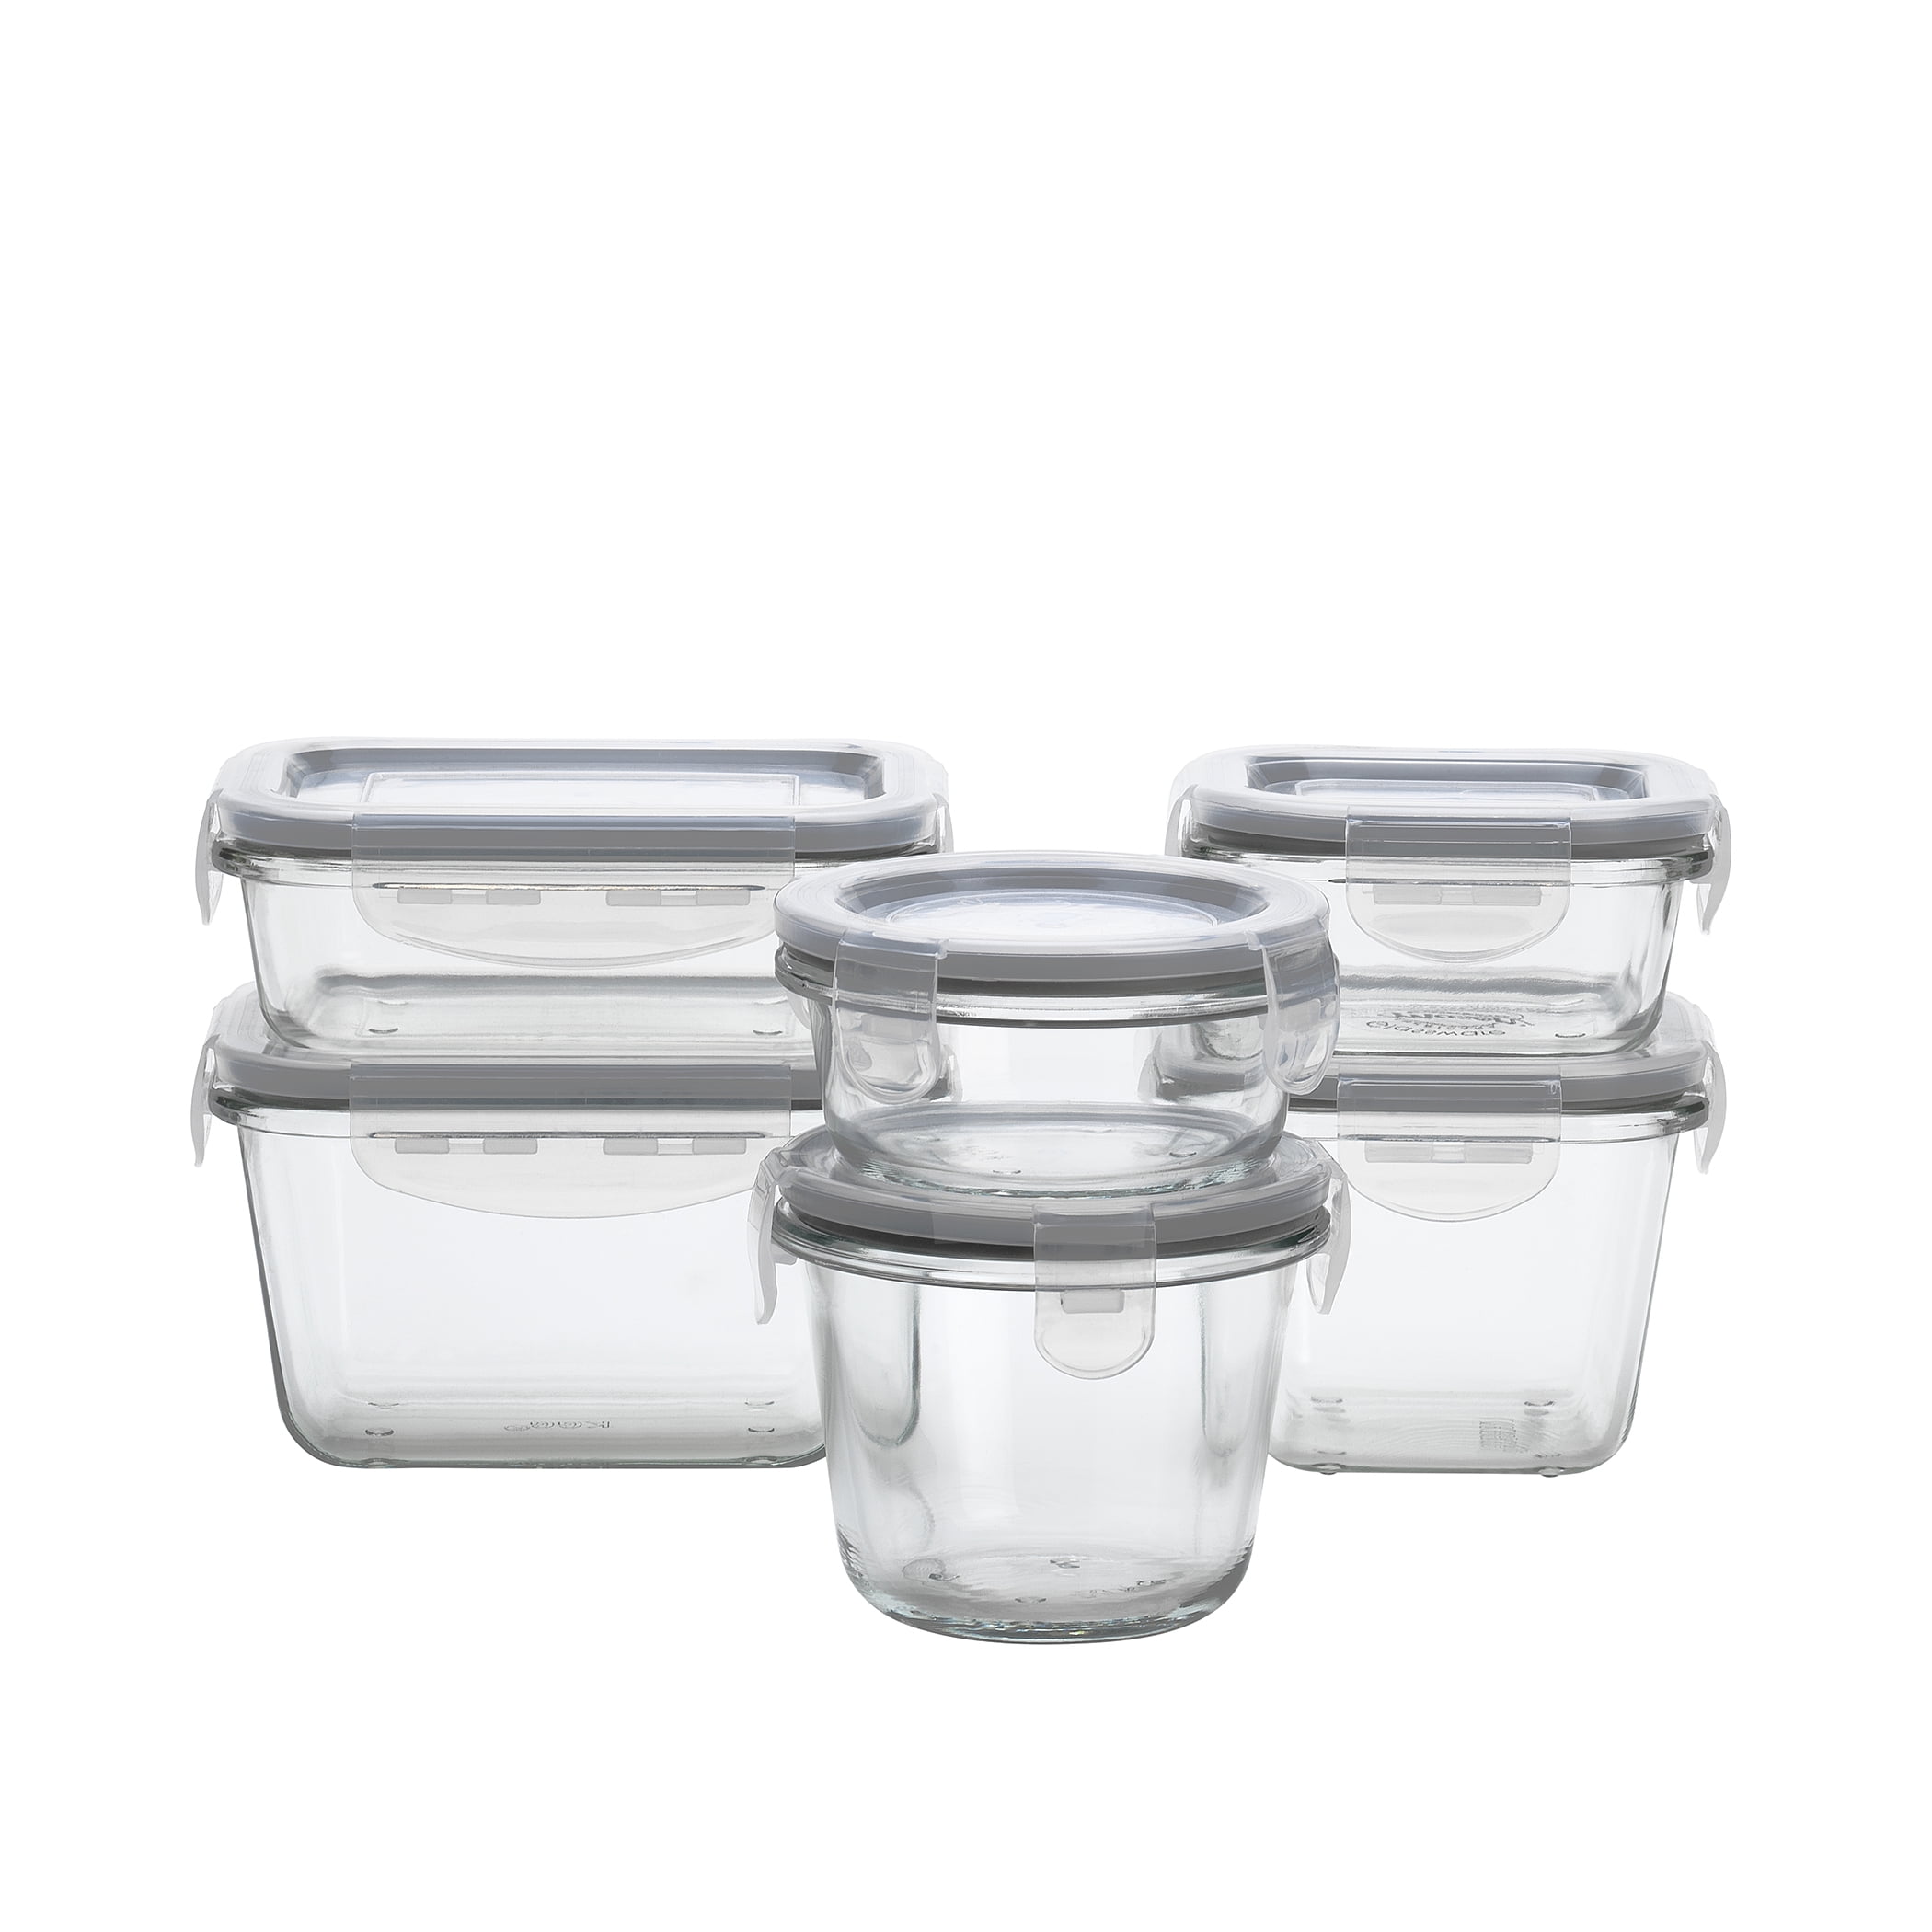 Mason Craft and More 24 oz. Food Storage Container - Set of 3 - 20339932